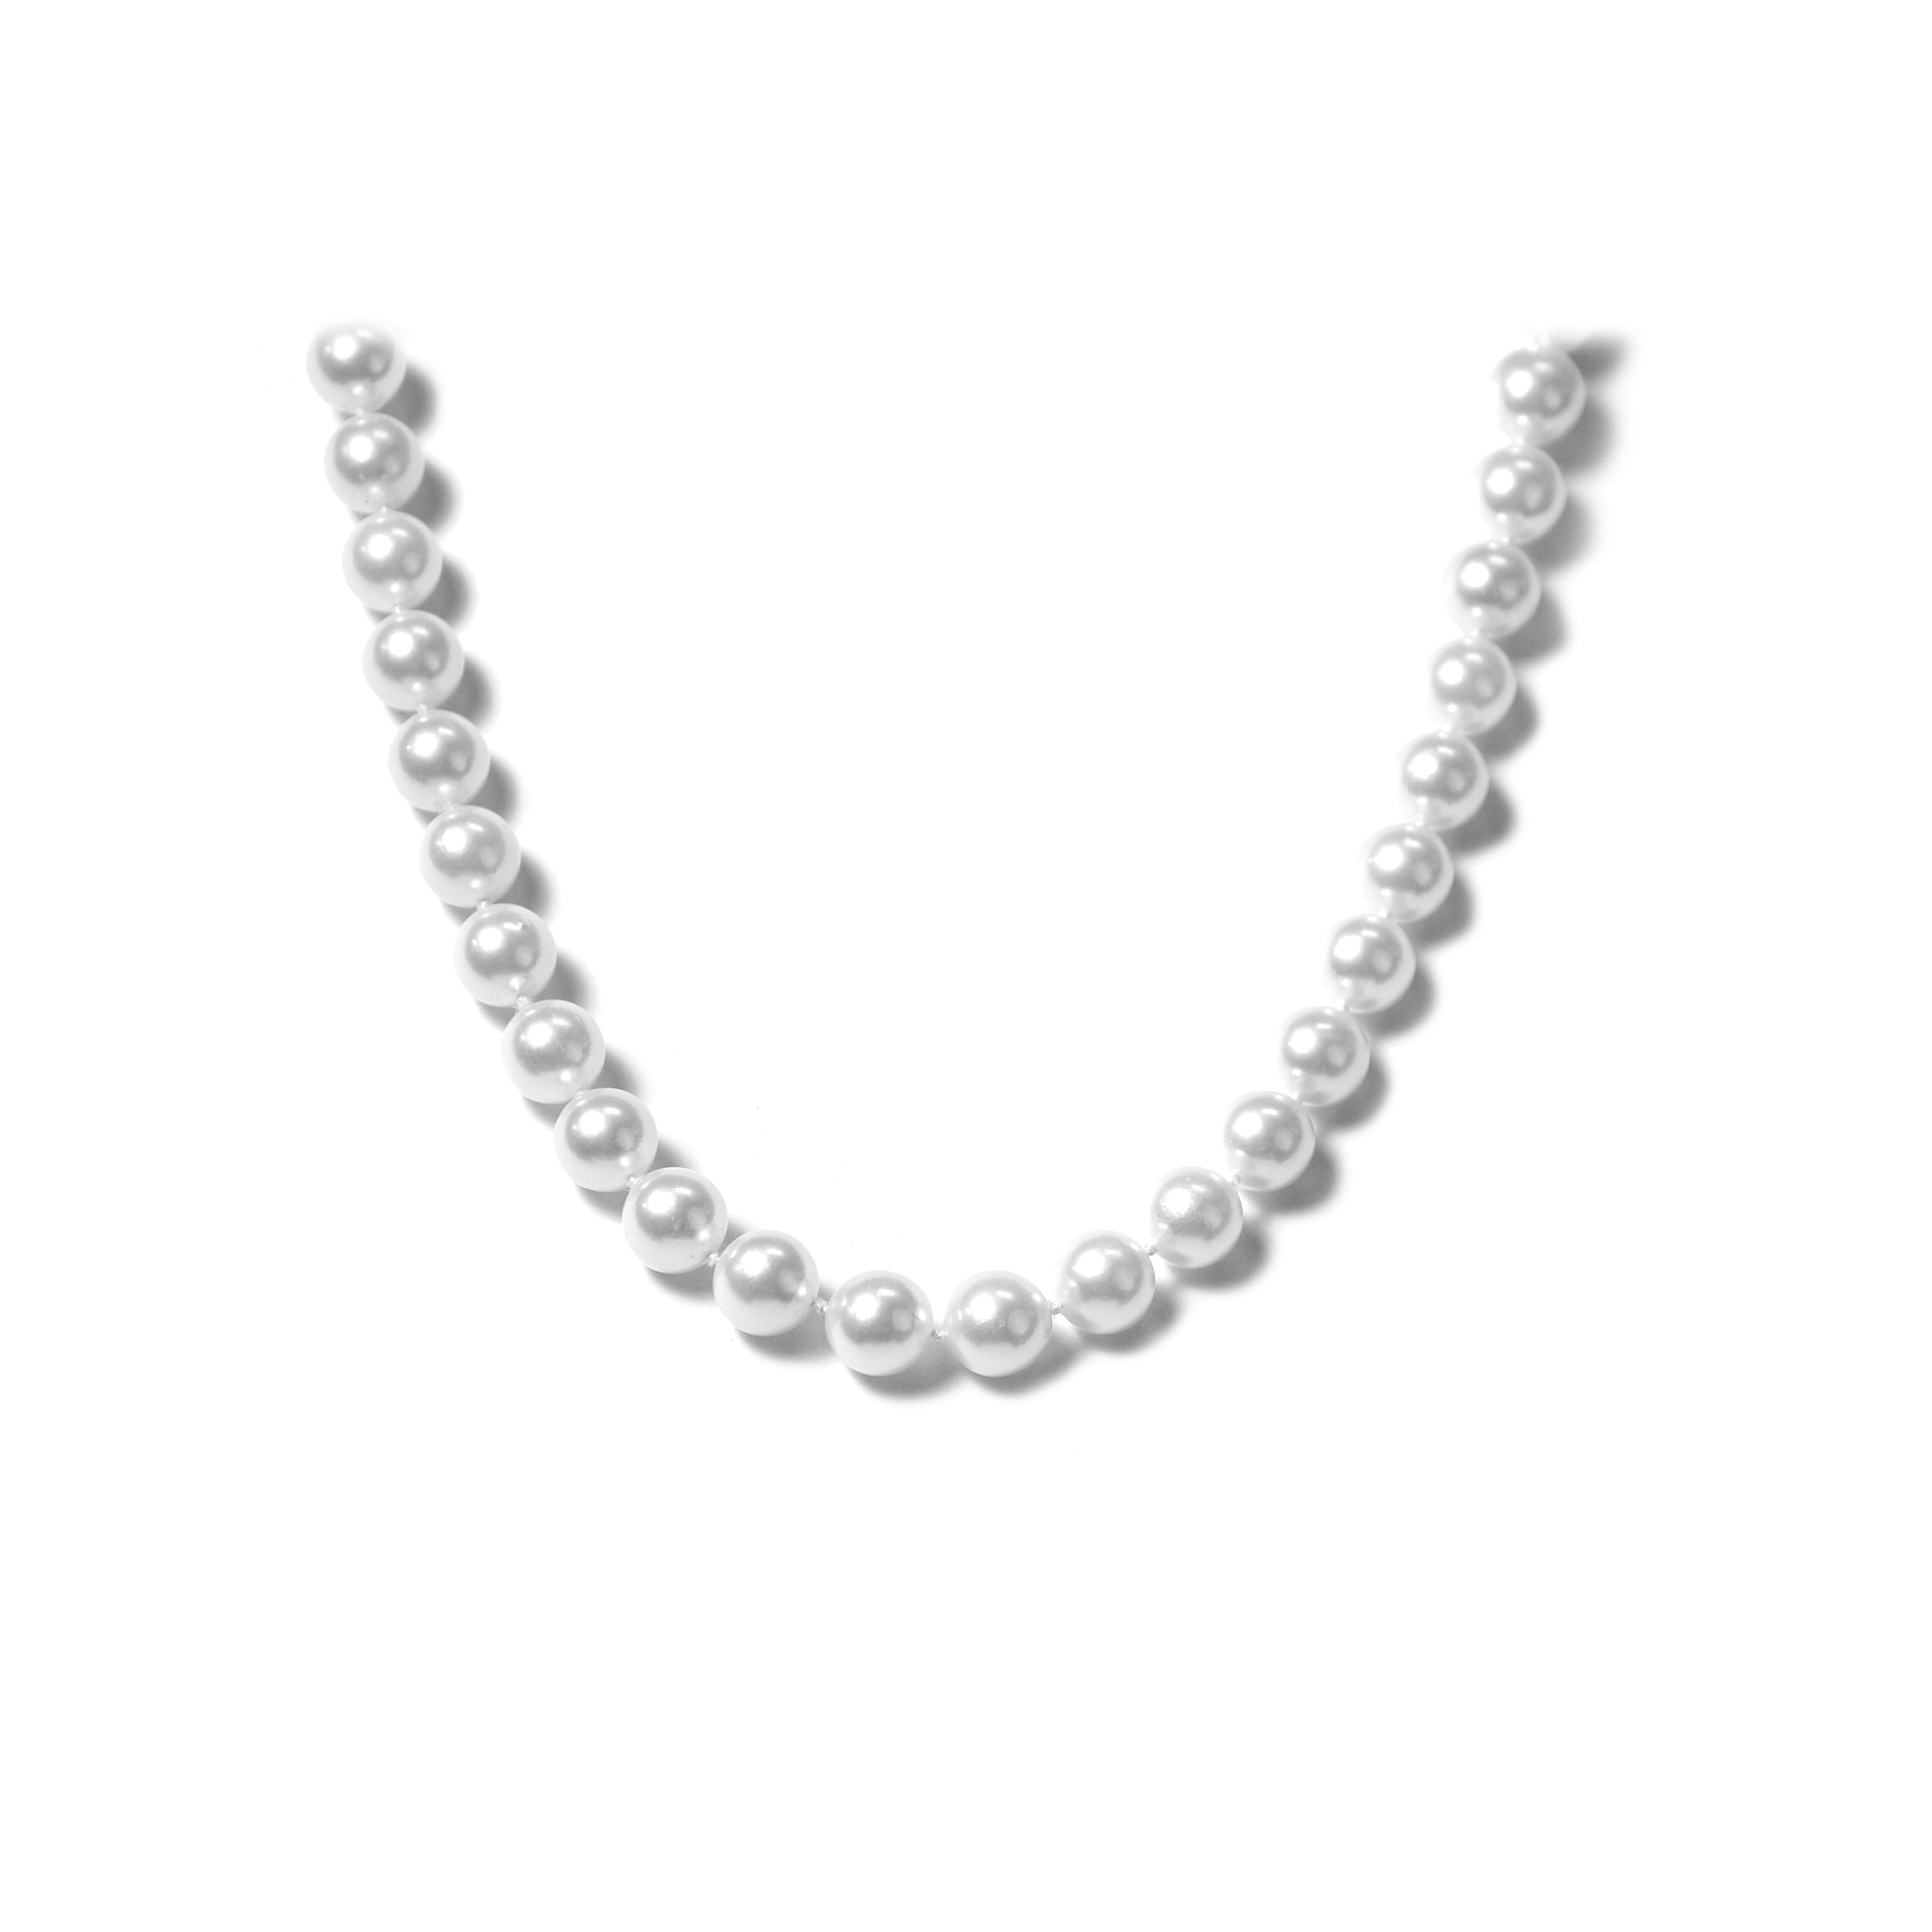 Enhance your style with this South Sea Pearl Necklace. Crafted with lustrous 12.00 mm South Sea pearls and a 18k gold and diamond clasp, this sophisticated piece is sure to elevate your look.